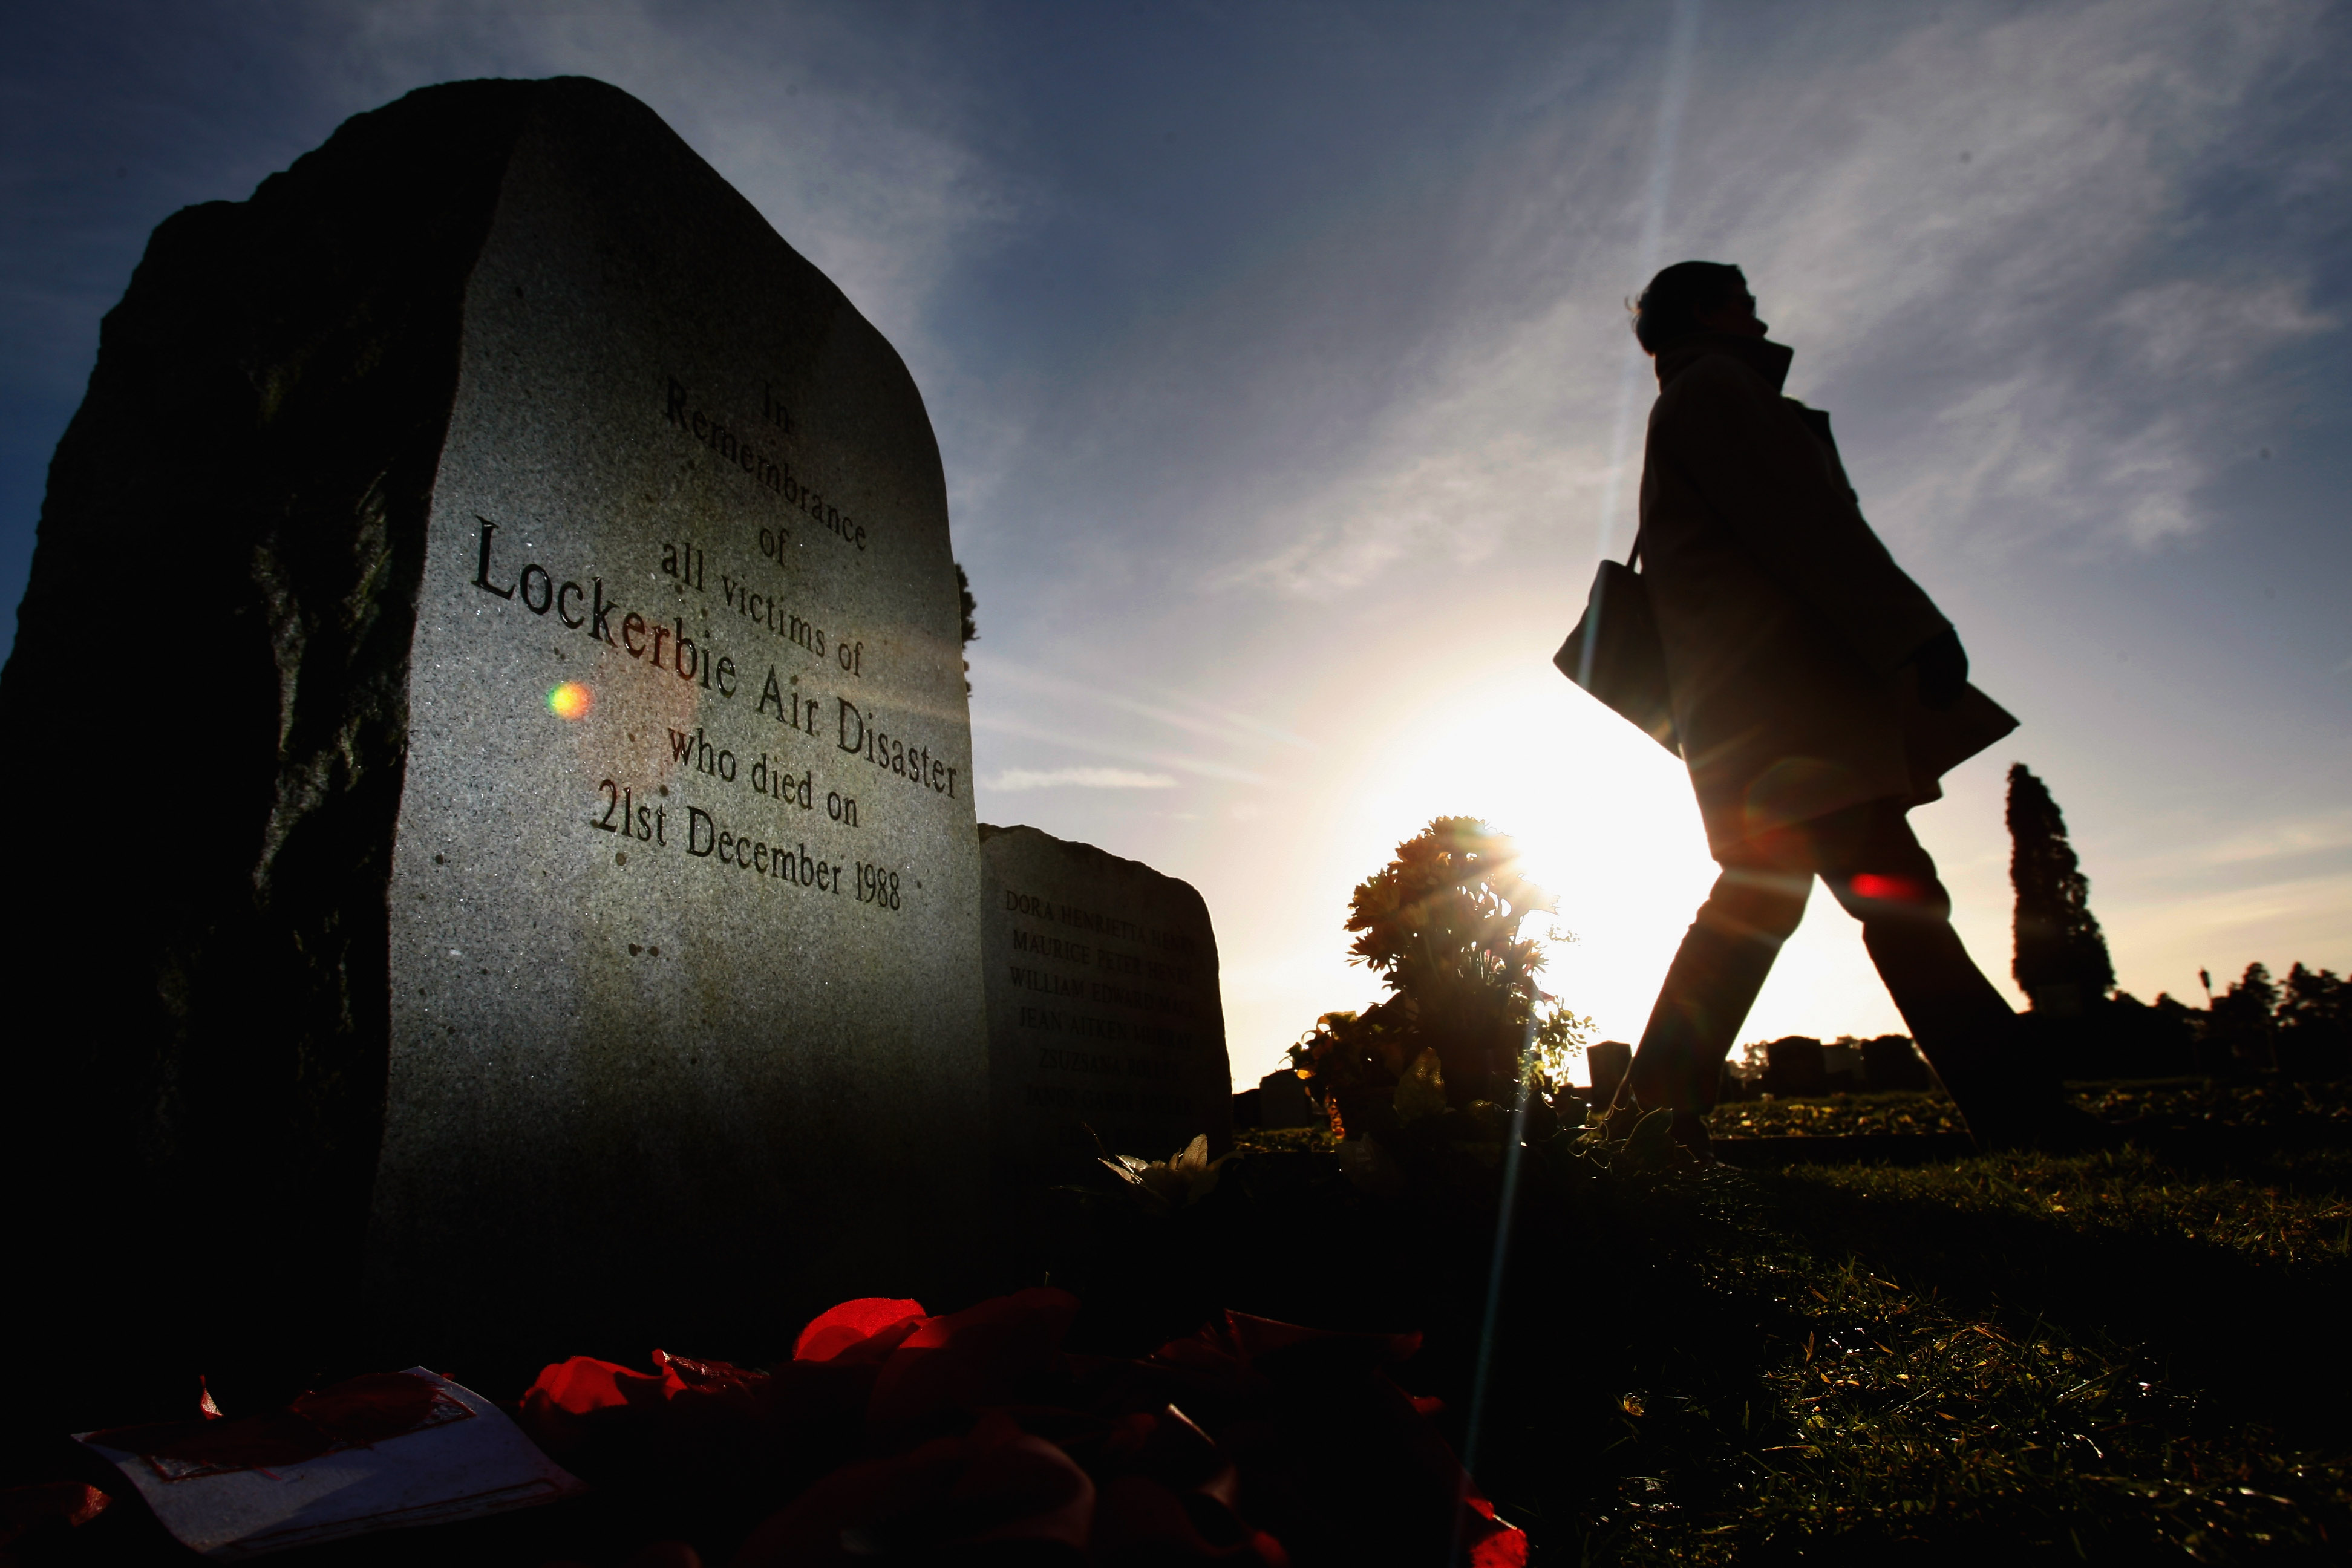 Commemorations are under way to remember those who died in the Lockerbie terrorist attack.